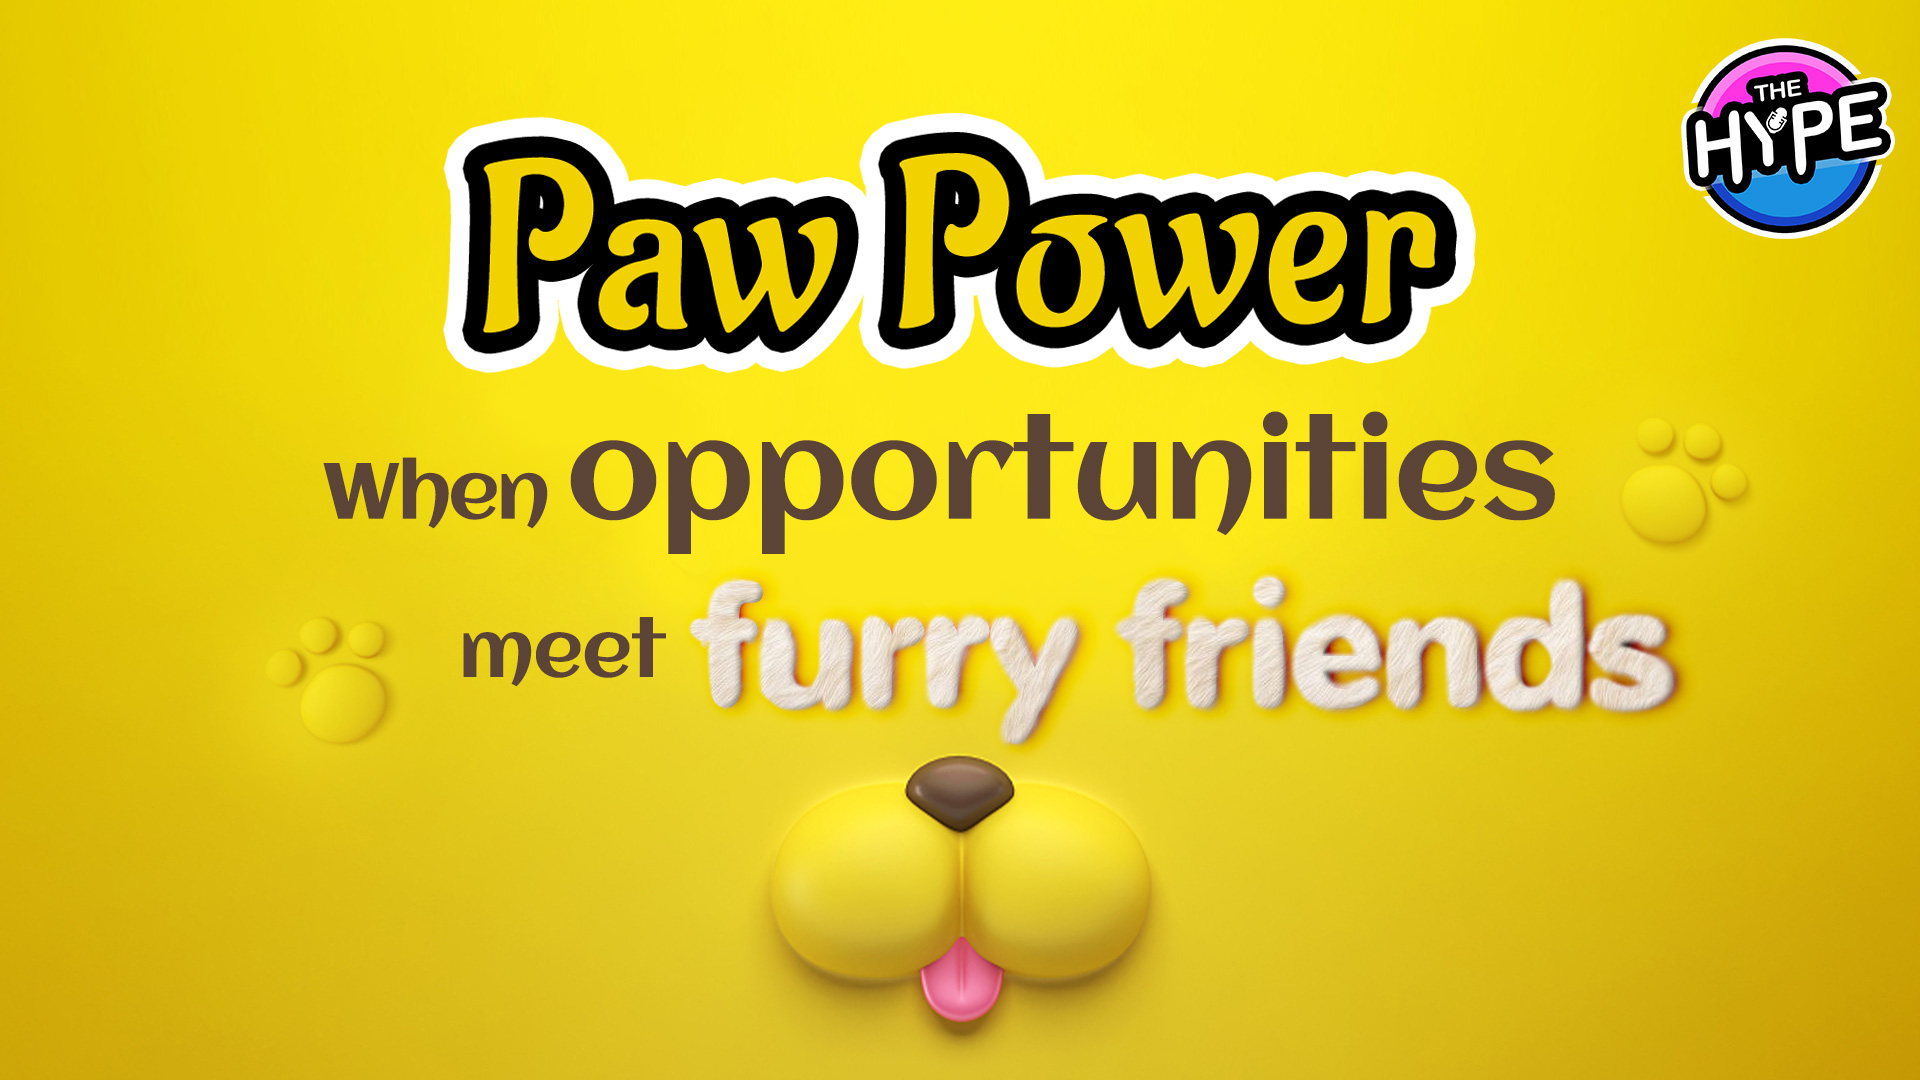 Live: THE HYPE – Paw Power: When opportunities meet furry friends